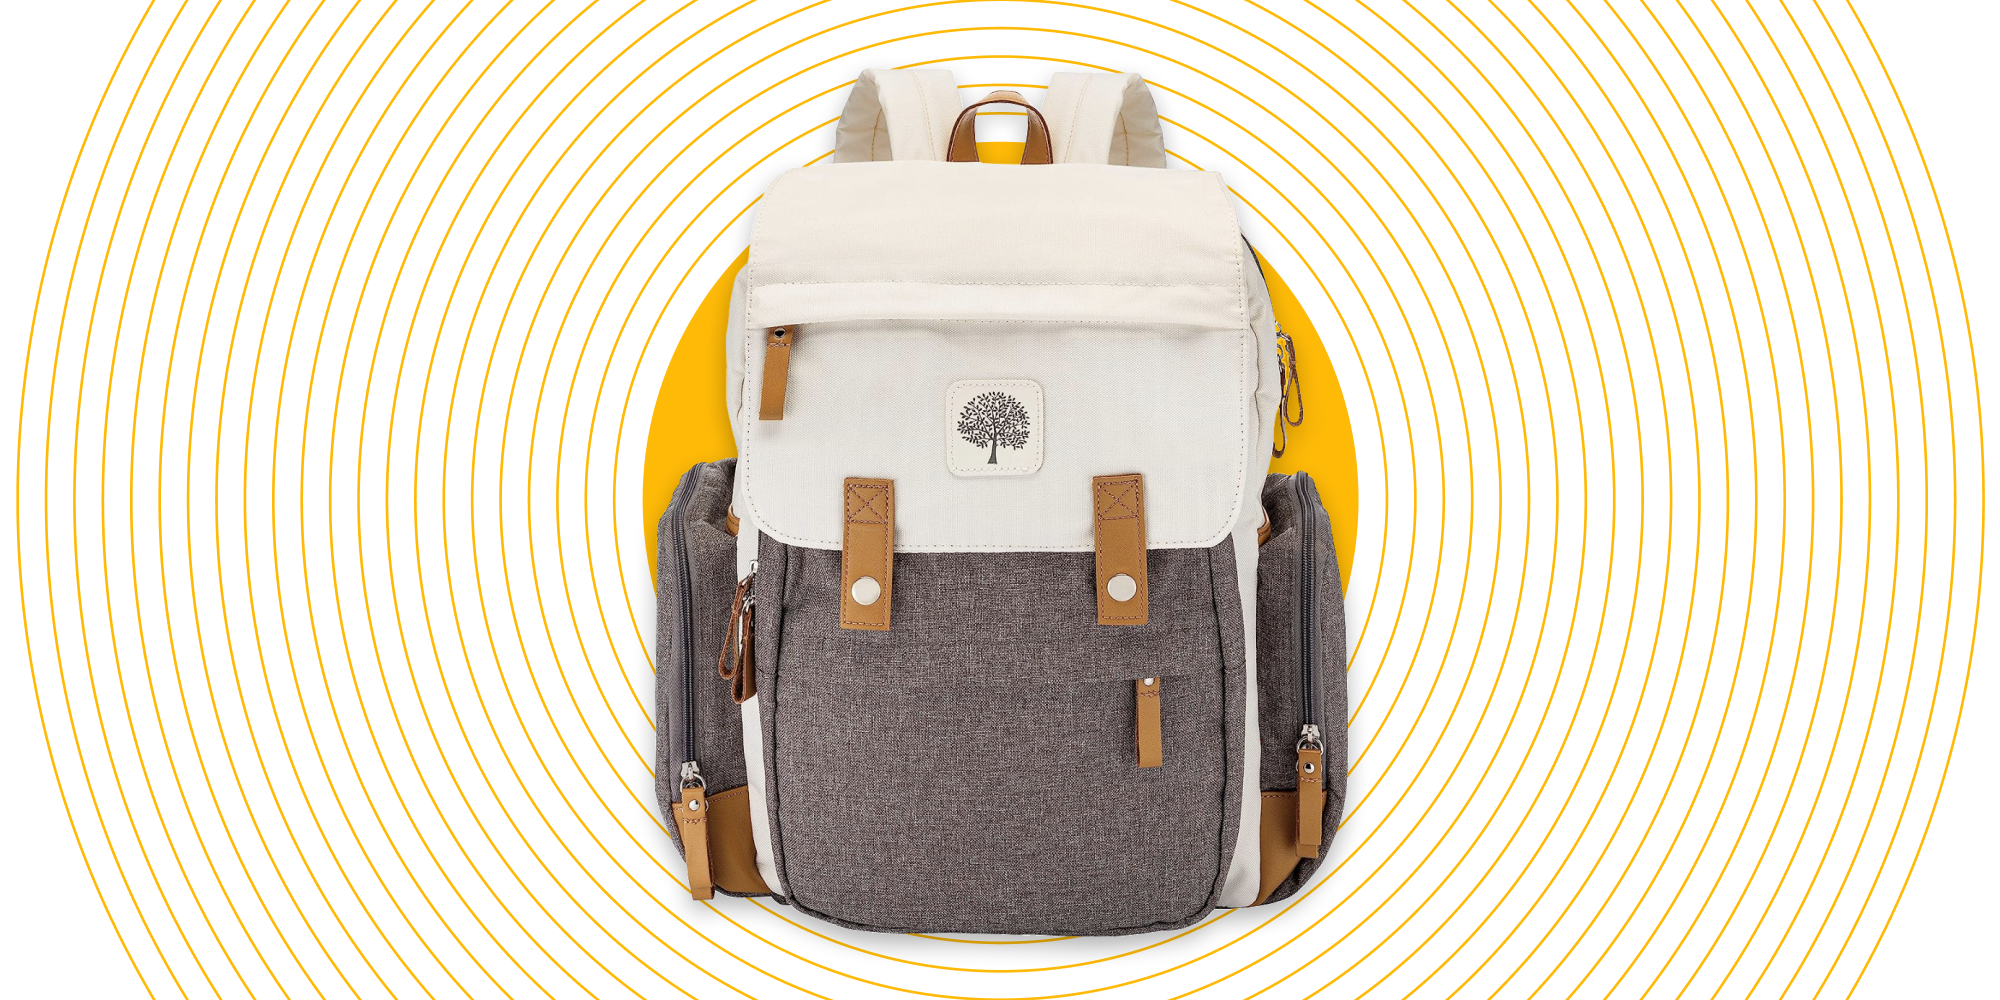 I have the Large Dagne Dover Indi Diaper Backpack - I love it! But whe, Best Diaper Bag